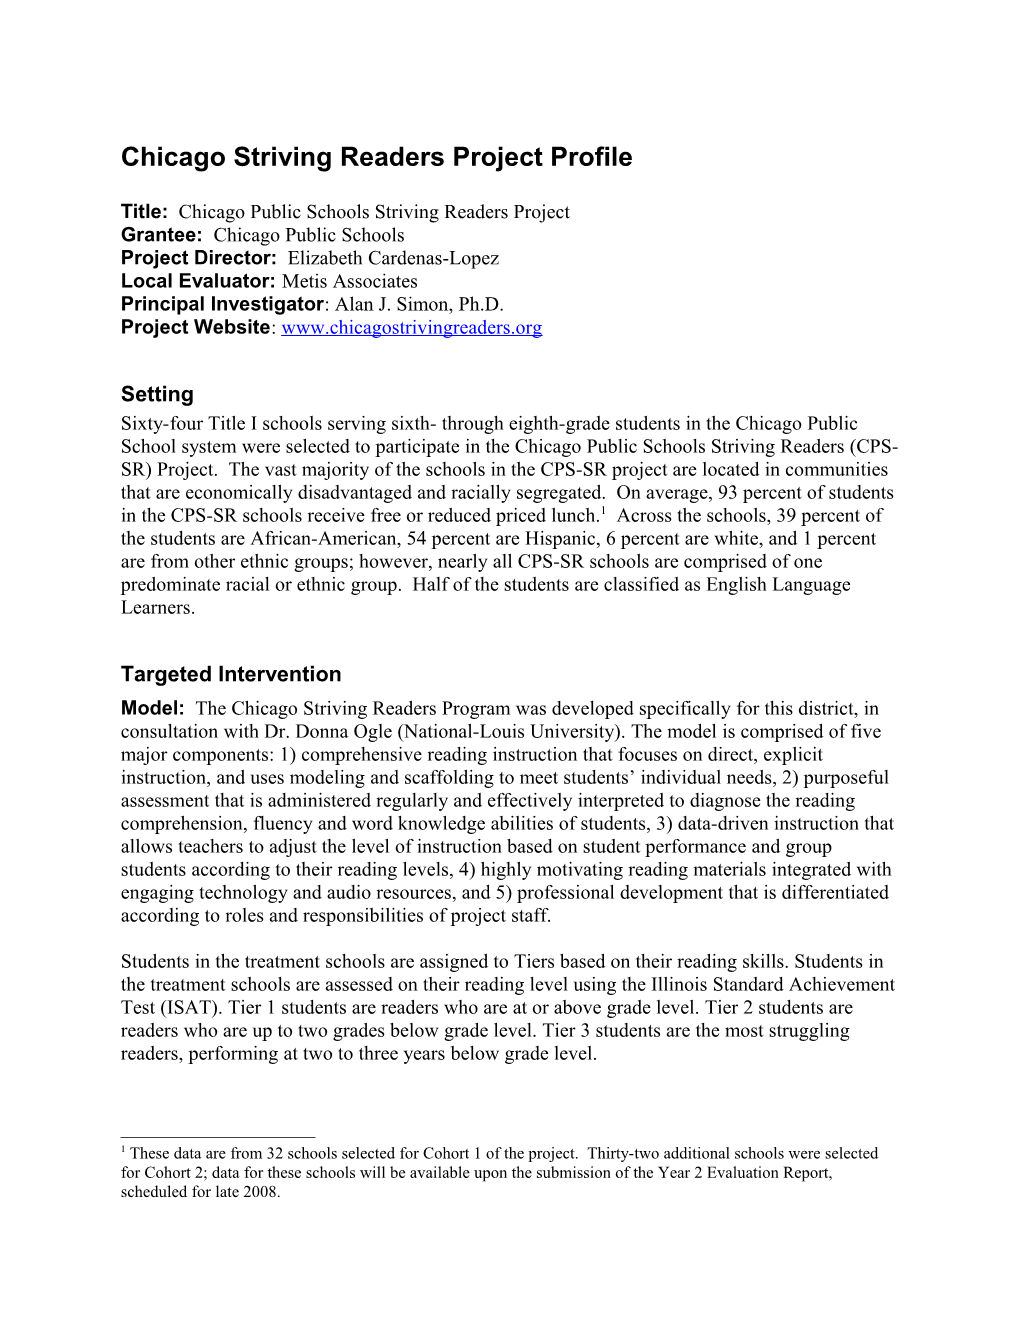 Chicago Striving Readers Project: Project Abstract (MS WORD)